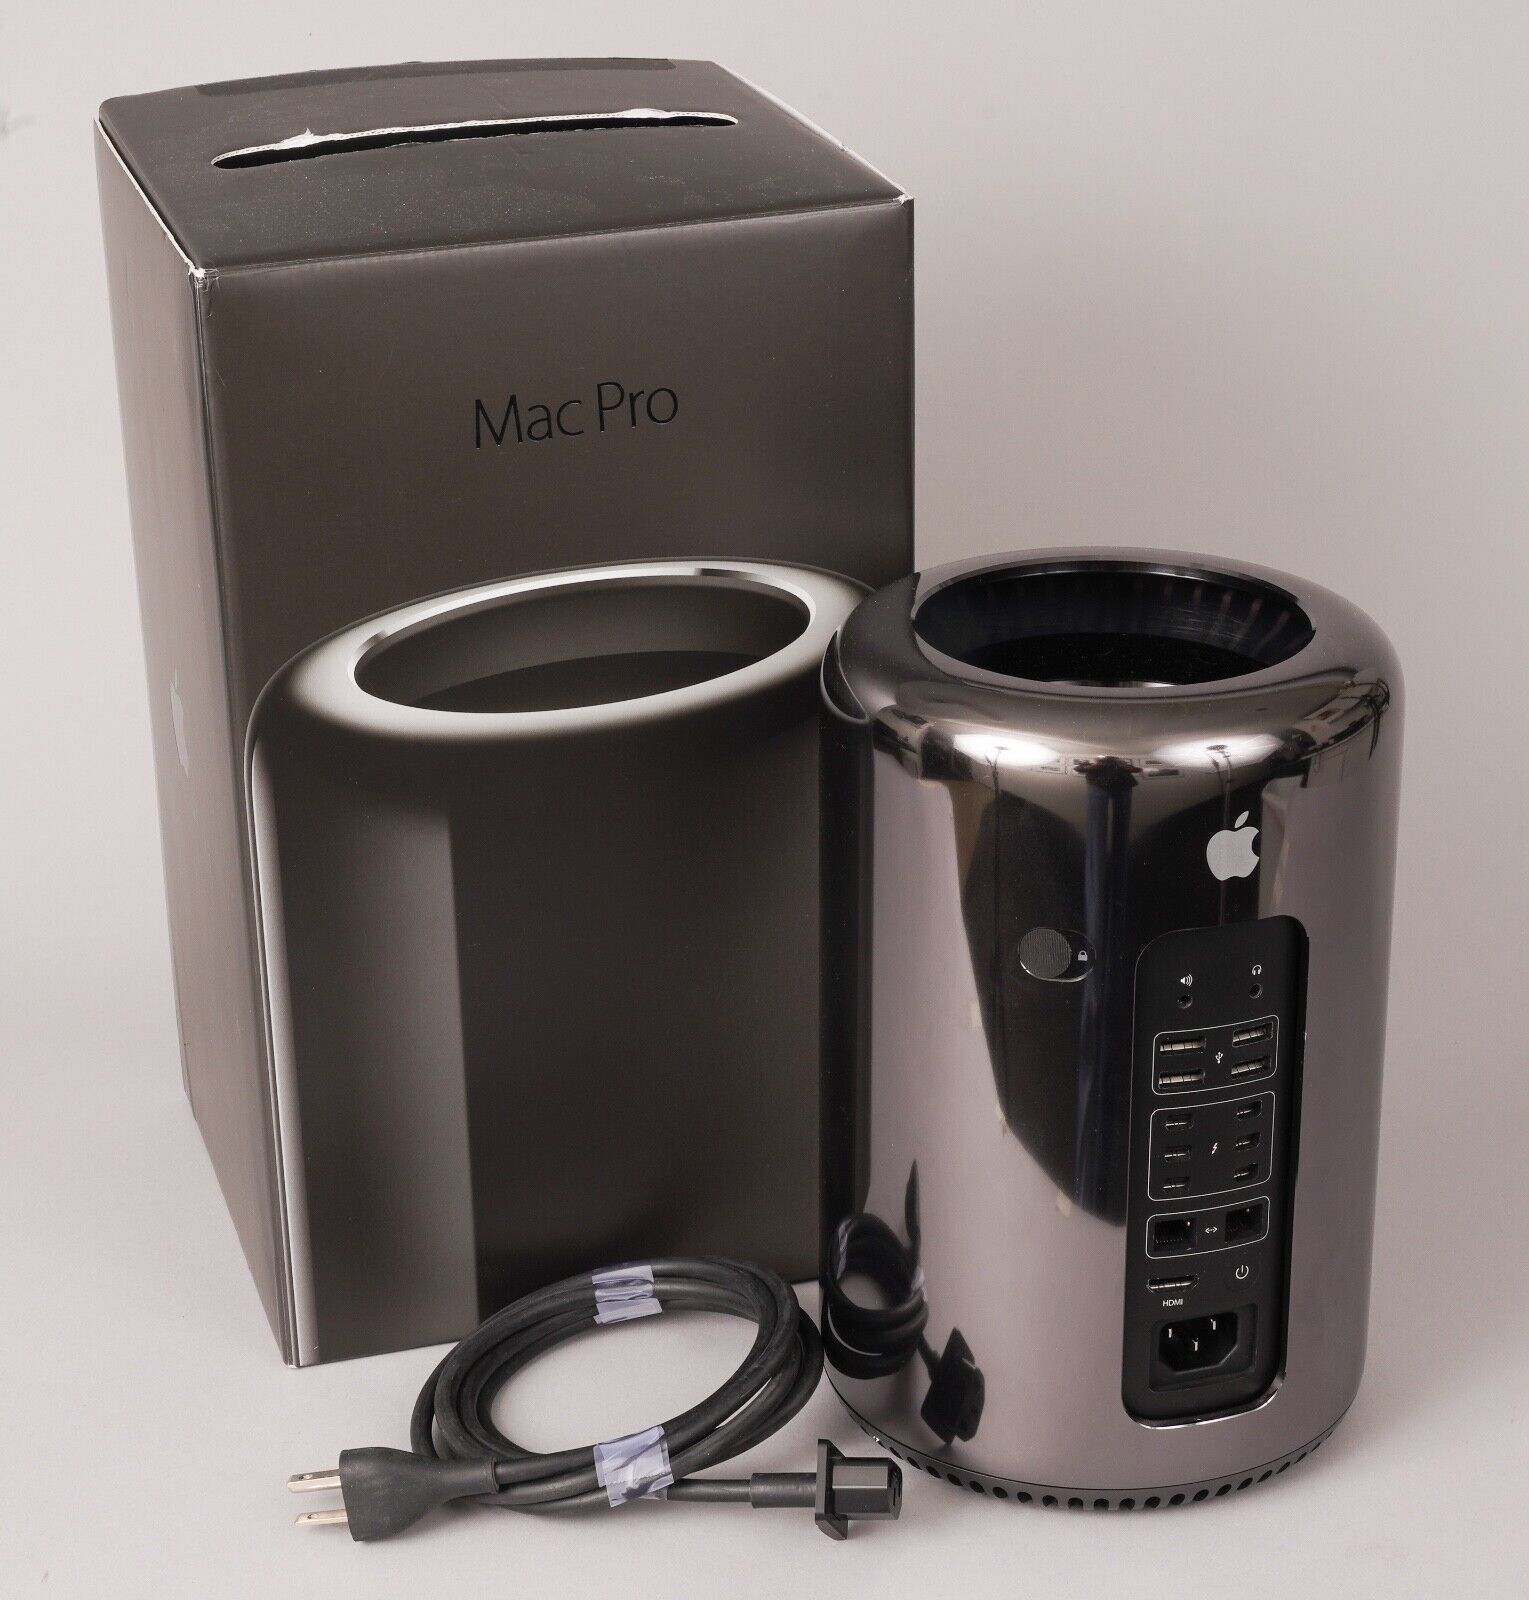 Apple Mac Pro Computer (Late 2013) Preowned Returned to Factory Settings